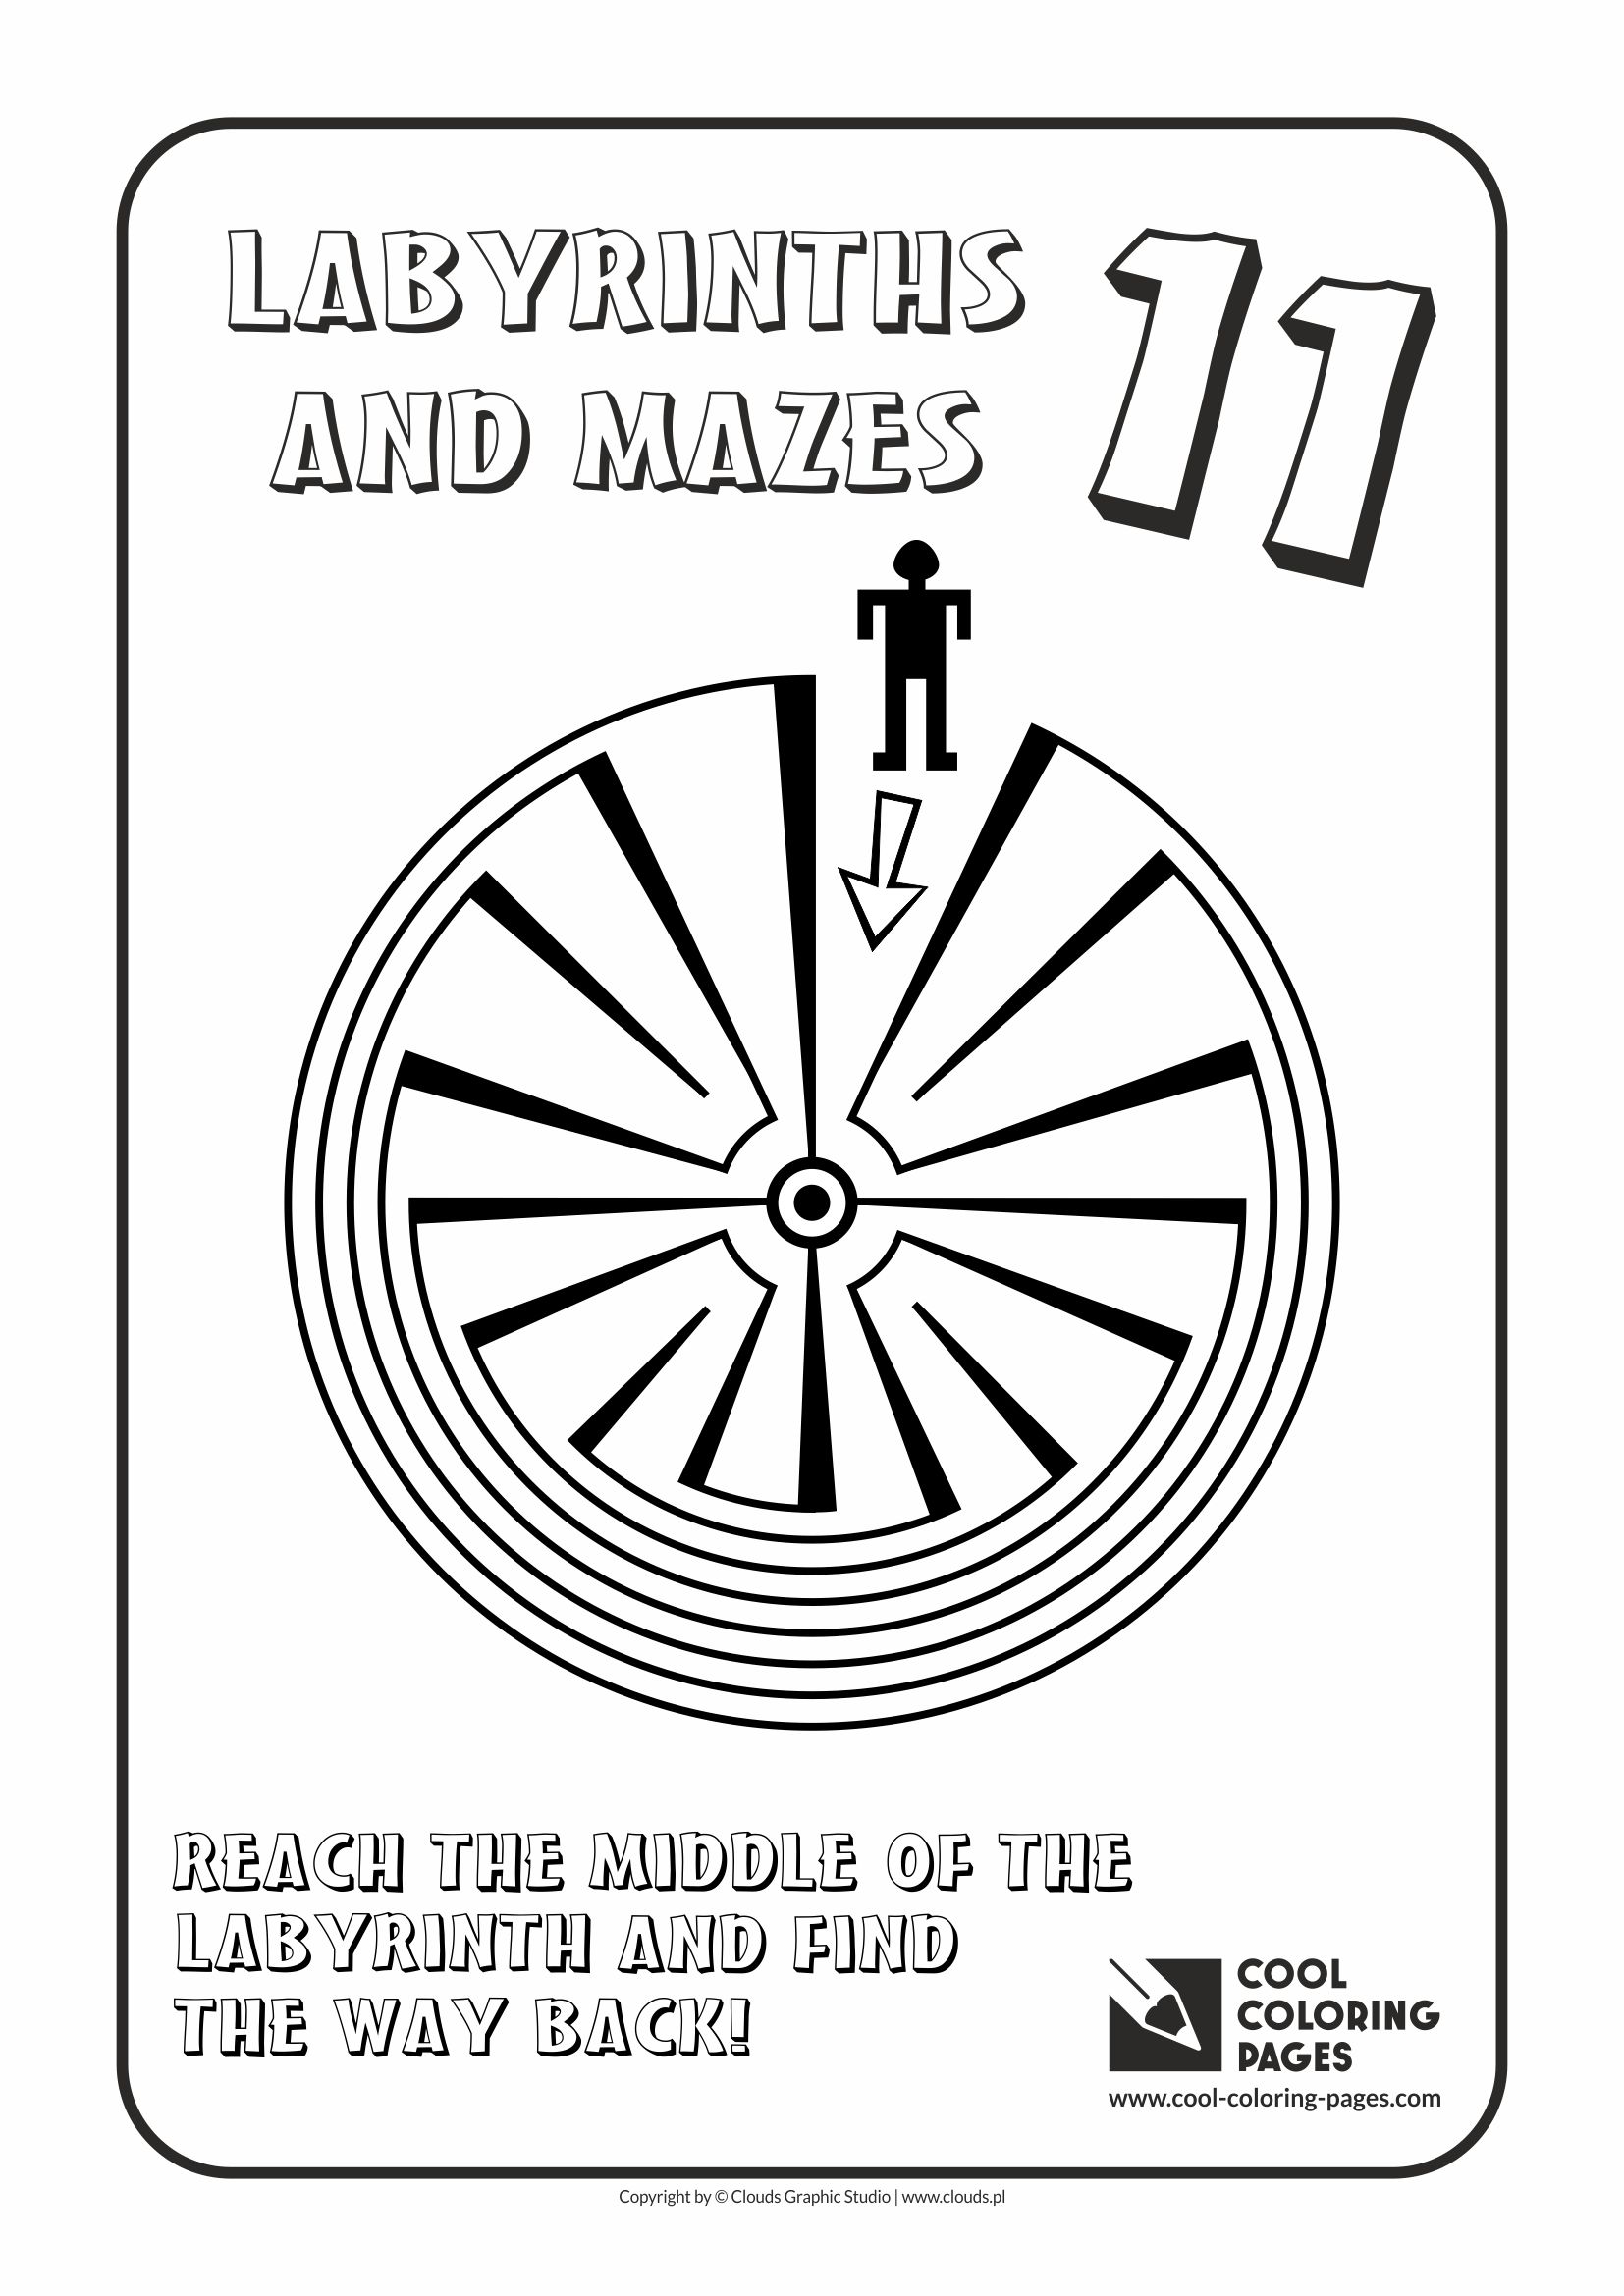 Cool Coloring Pages - Labyrinths and mazes / Maze no 11